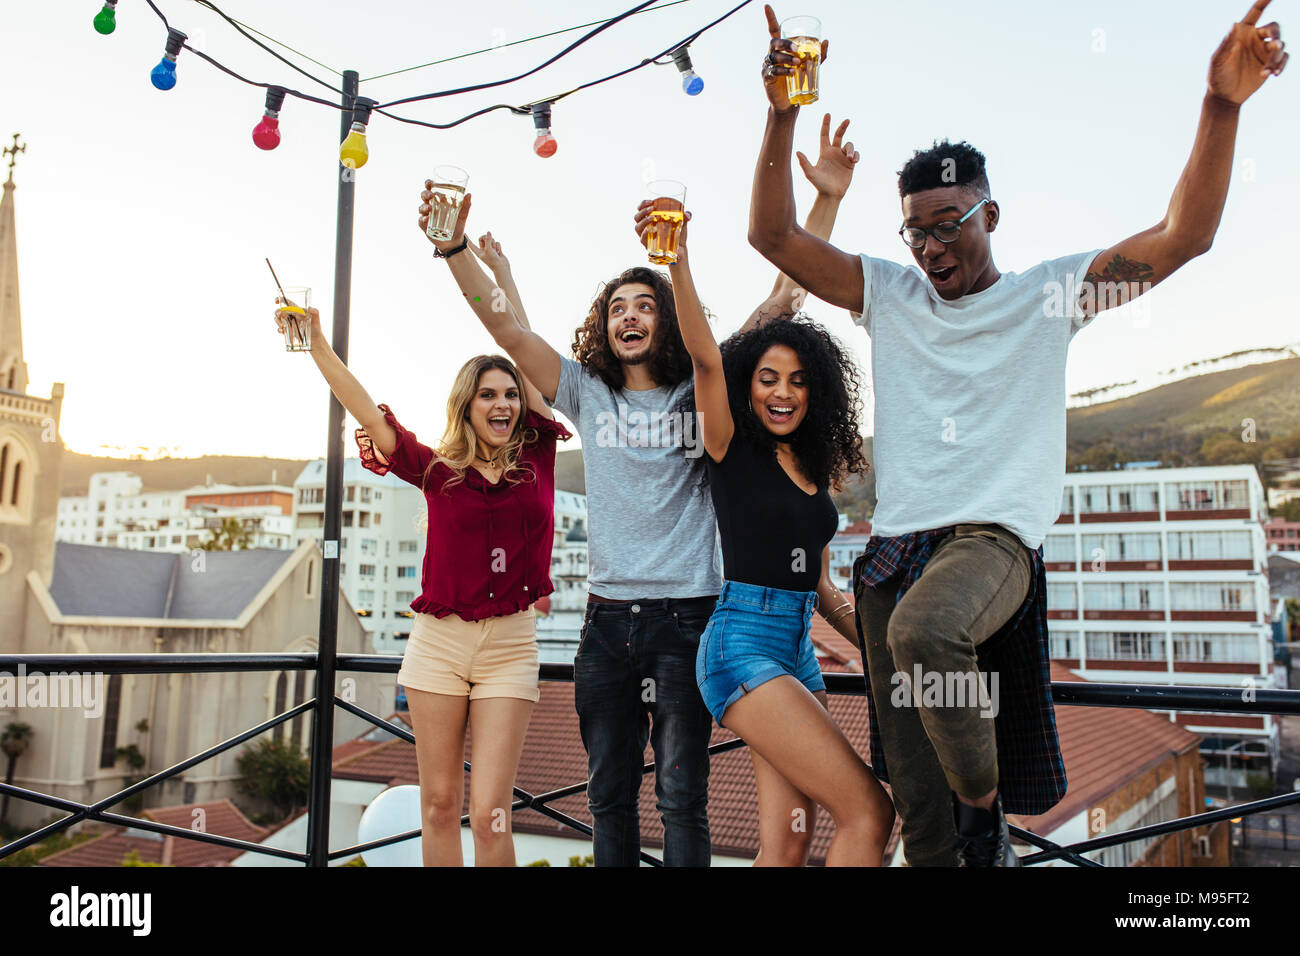 Young people partying on terrace with drinks. Mixed race men and women enjoying drinks on rooftop. Stock Photo